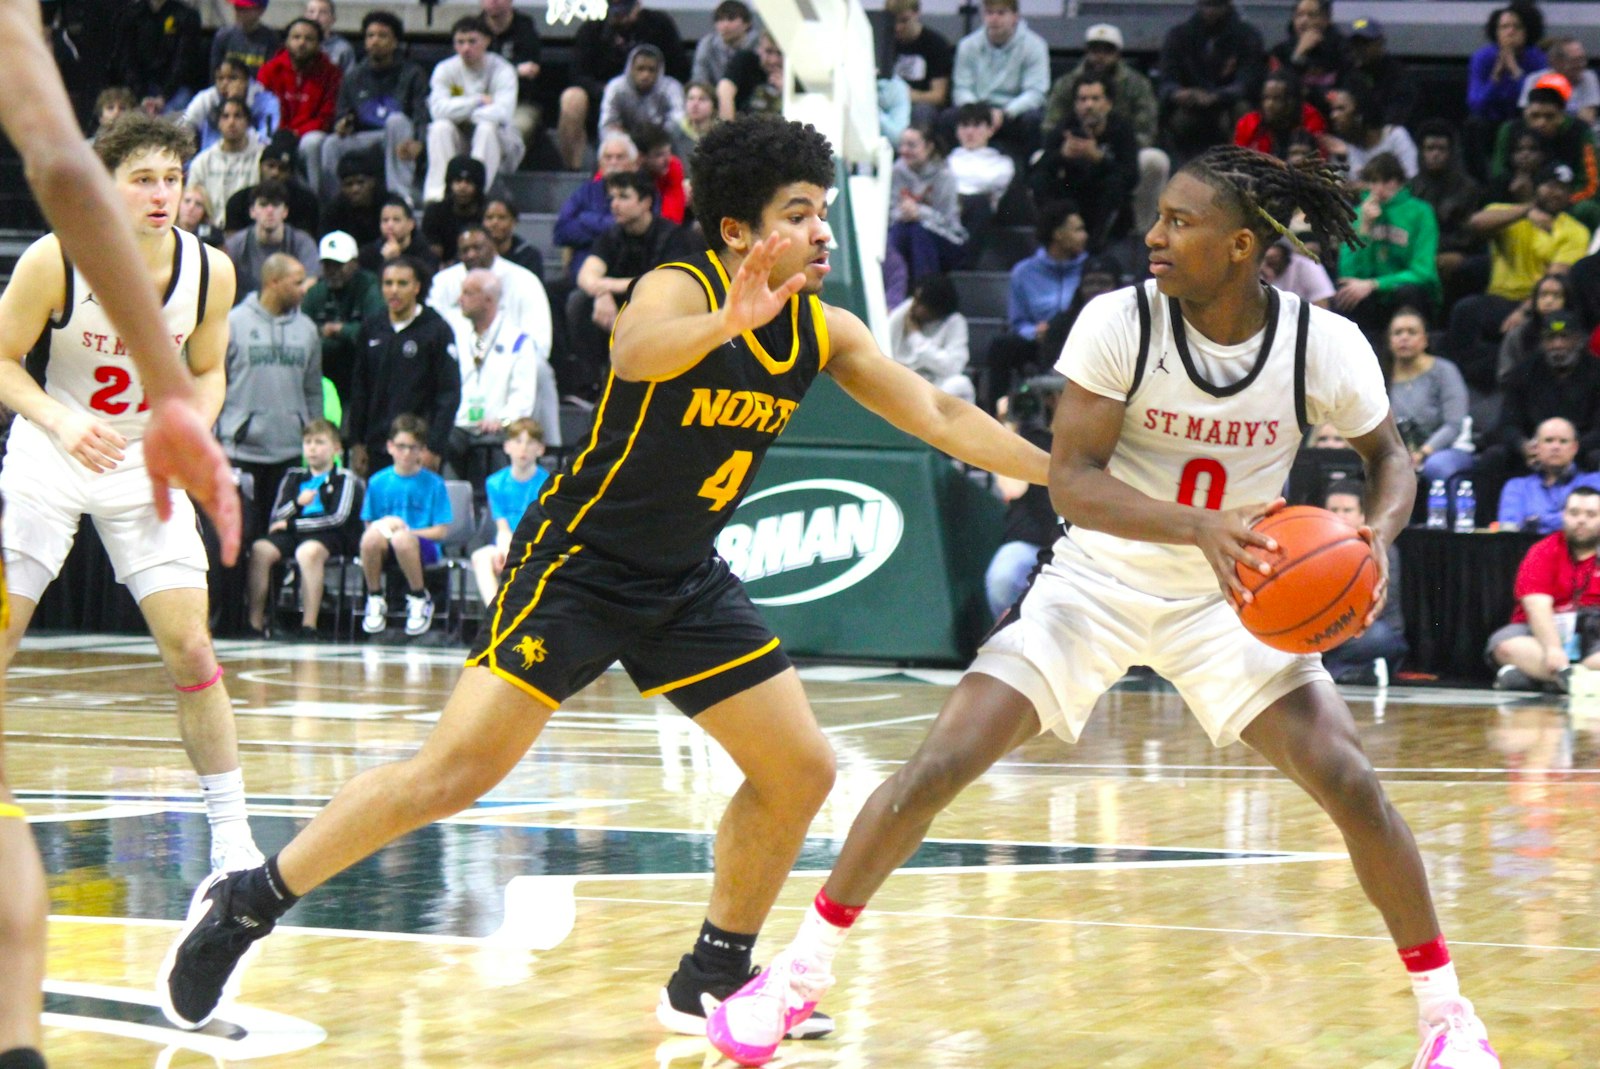 Sharod Barnes is guarded by North Farmington’s D.J. Morgan while Barnes looks to pass to Eaglet teammate Andrew Smith.